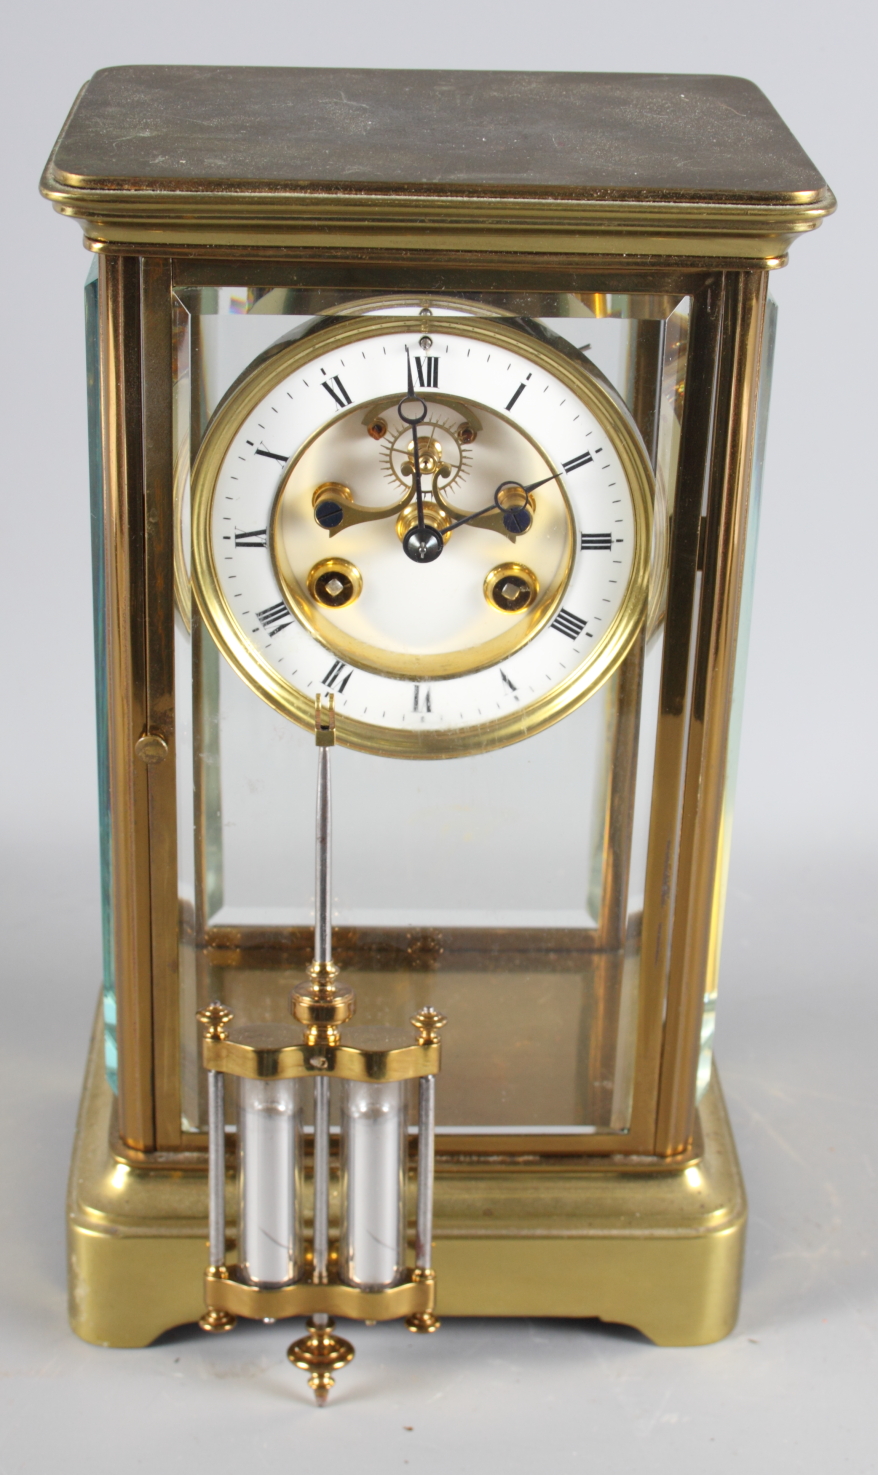 A 19th Century brass cased four-glass clock with white enamel dial and striking movement, 10 1/2" - Image 6 of 8